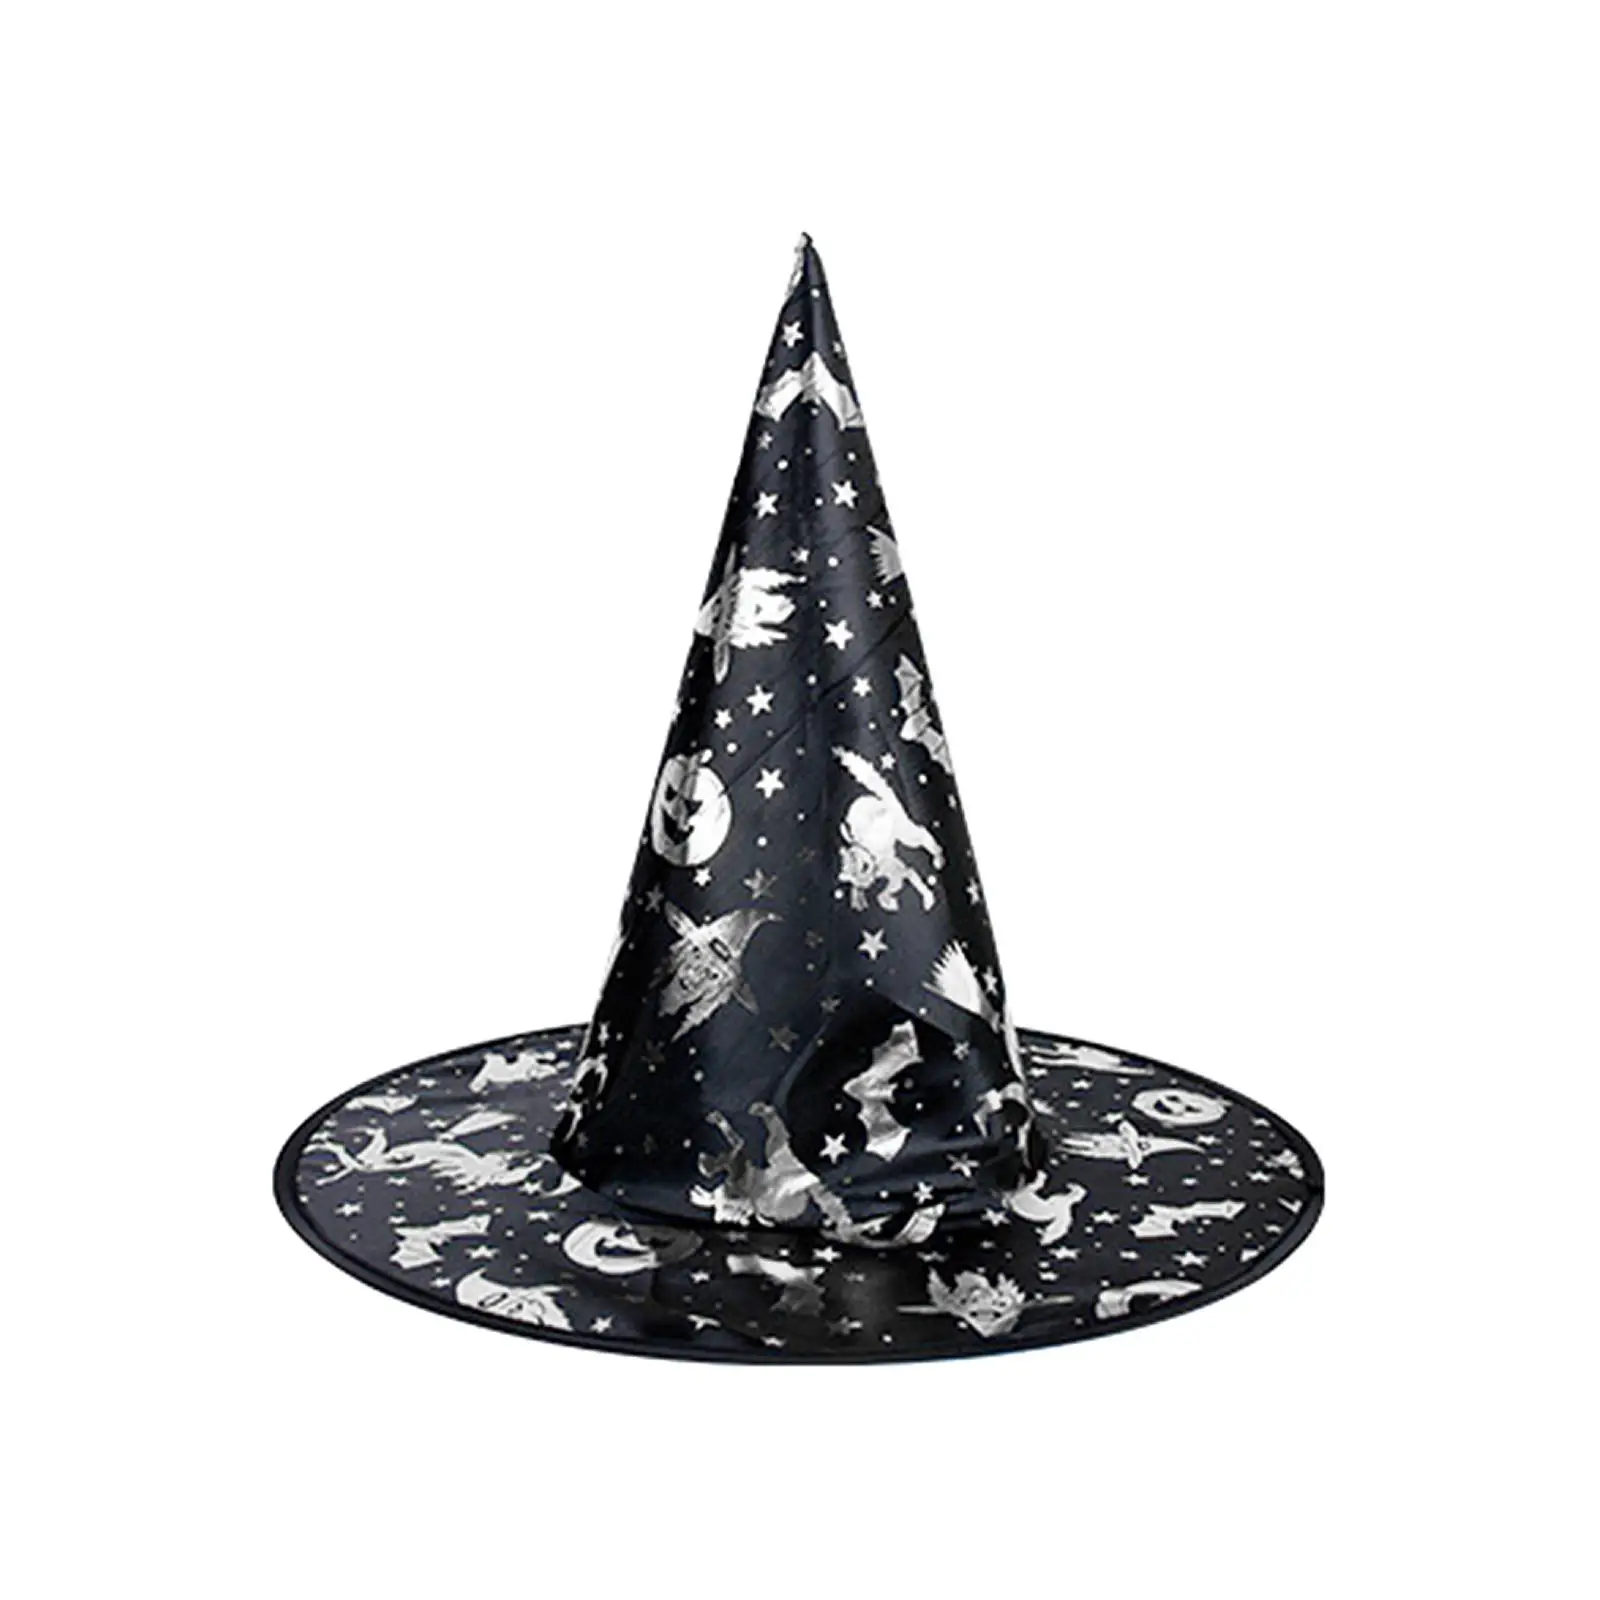 Witch Hat Fancy Dress Masquerade Creative Costume Accessory Show Pointed Hat for Kids Adult Men Women Unisex Role Play Festivals